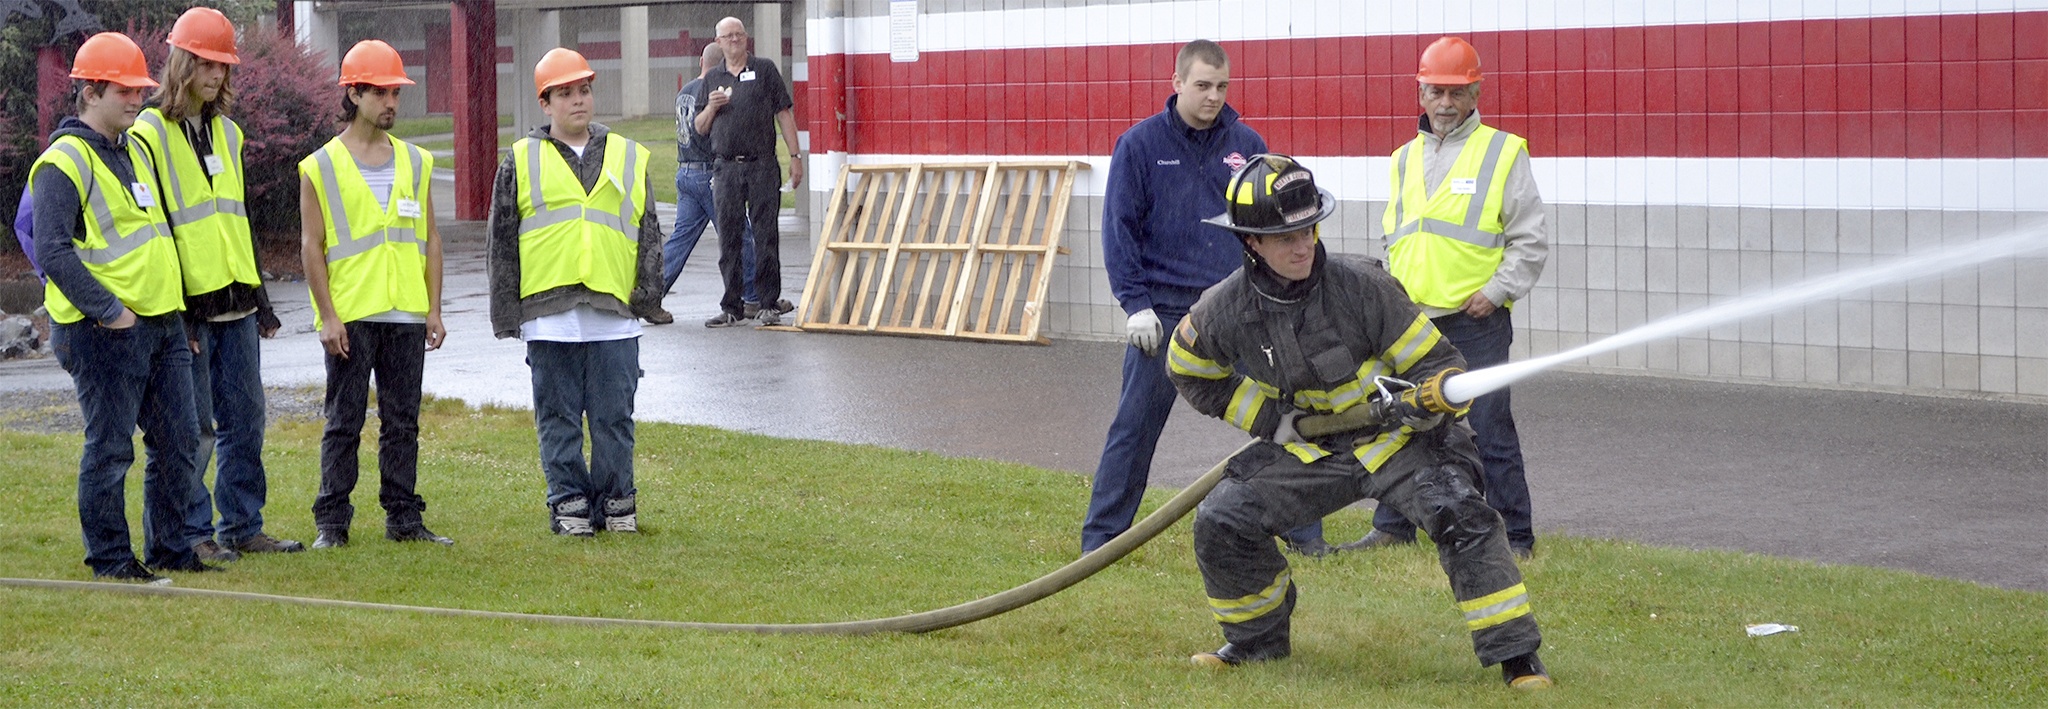 Students learned how to spray a fire hose at the event.